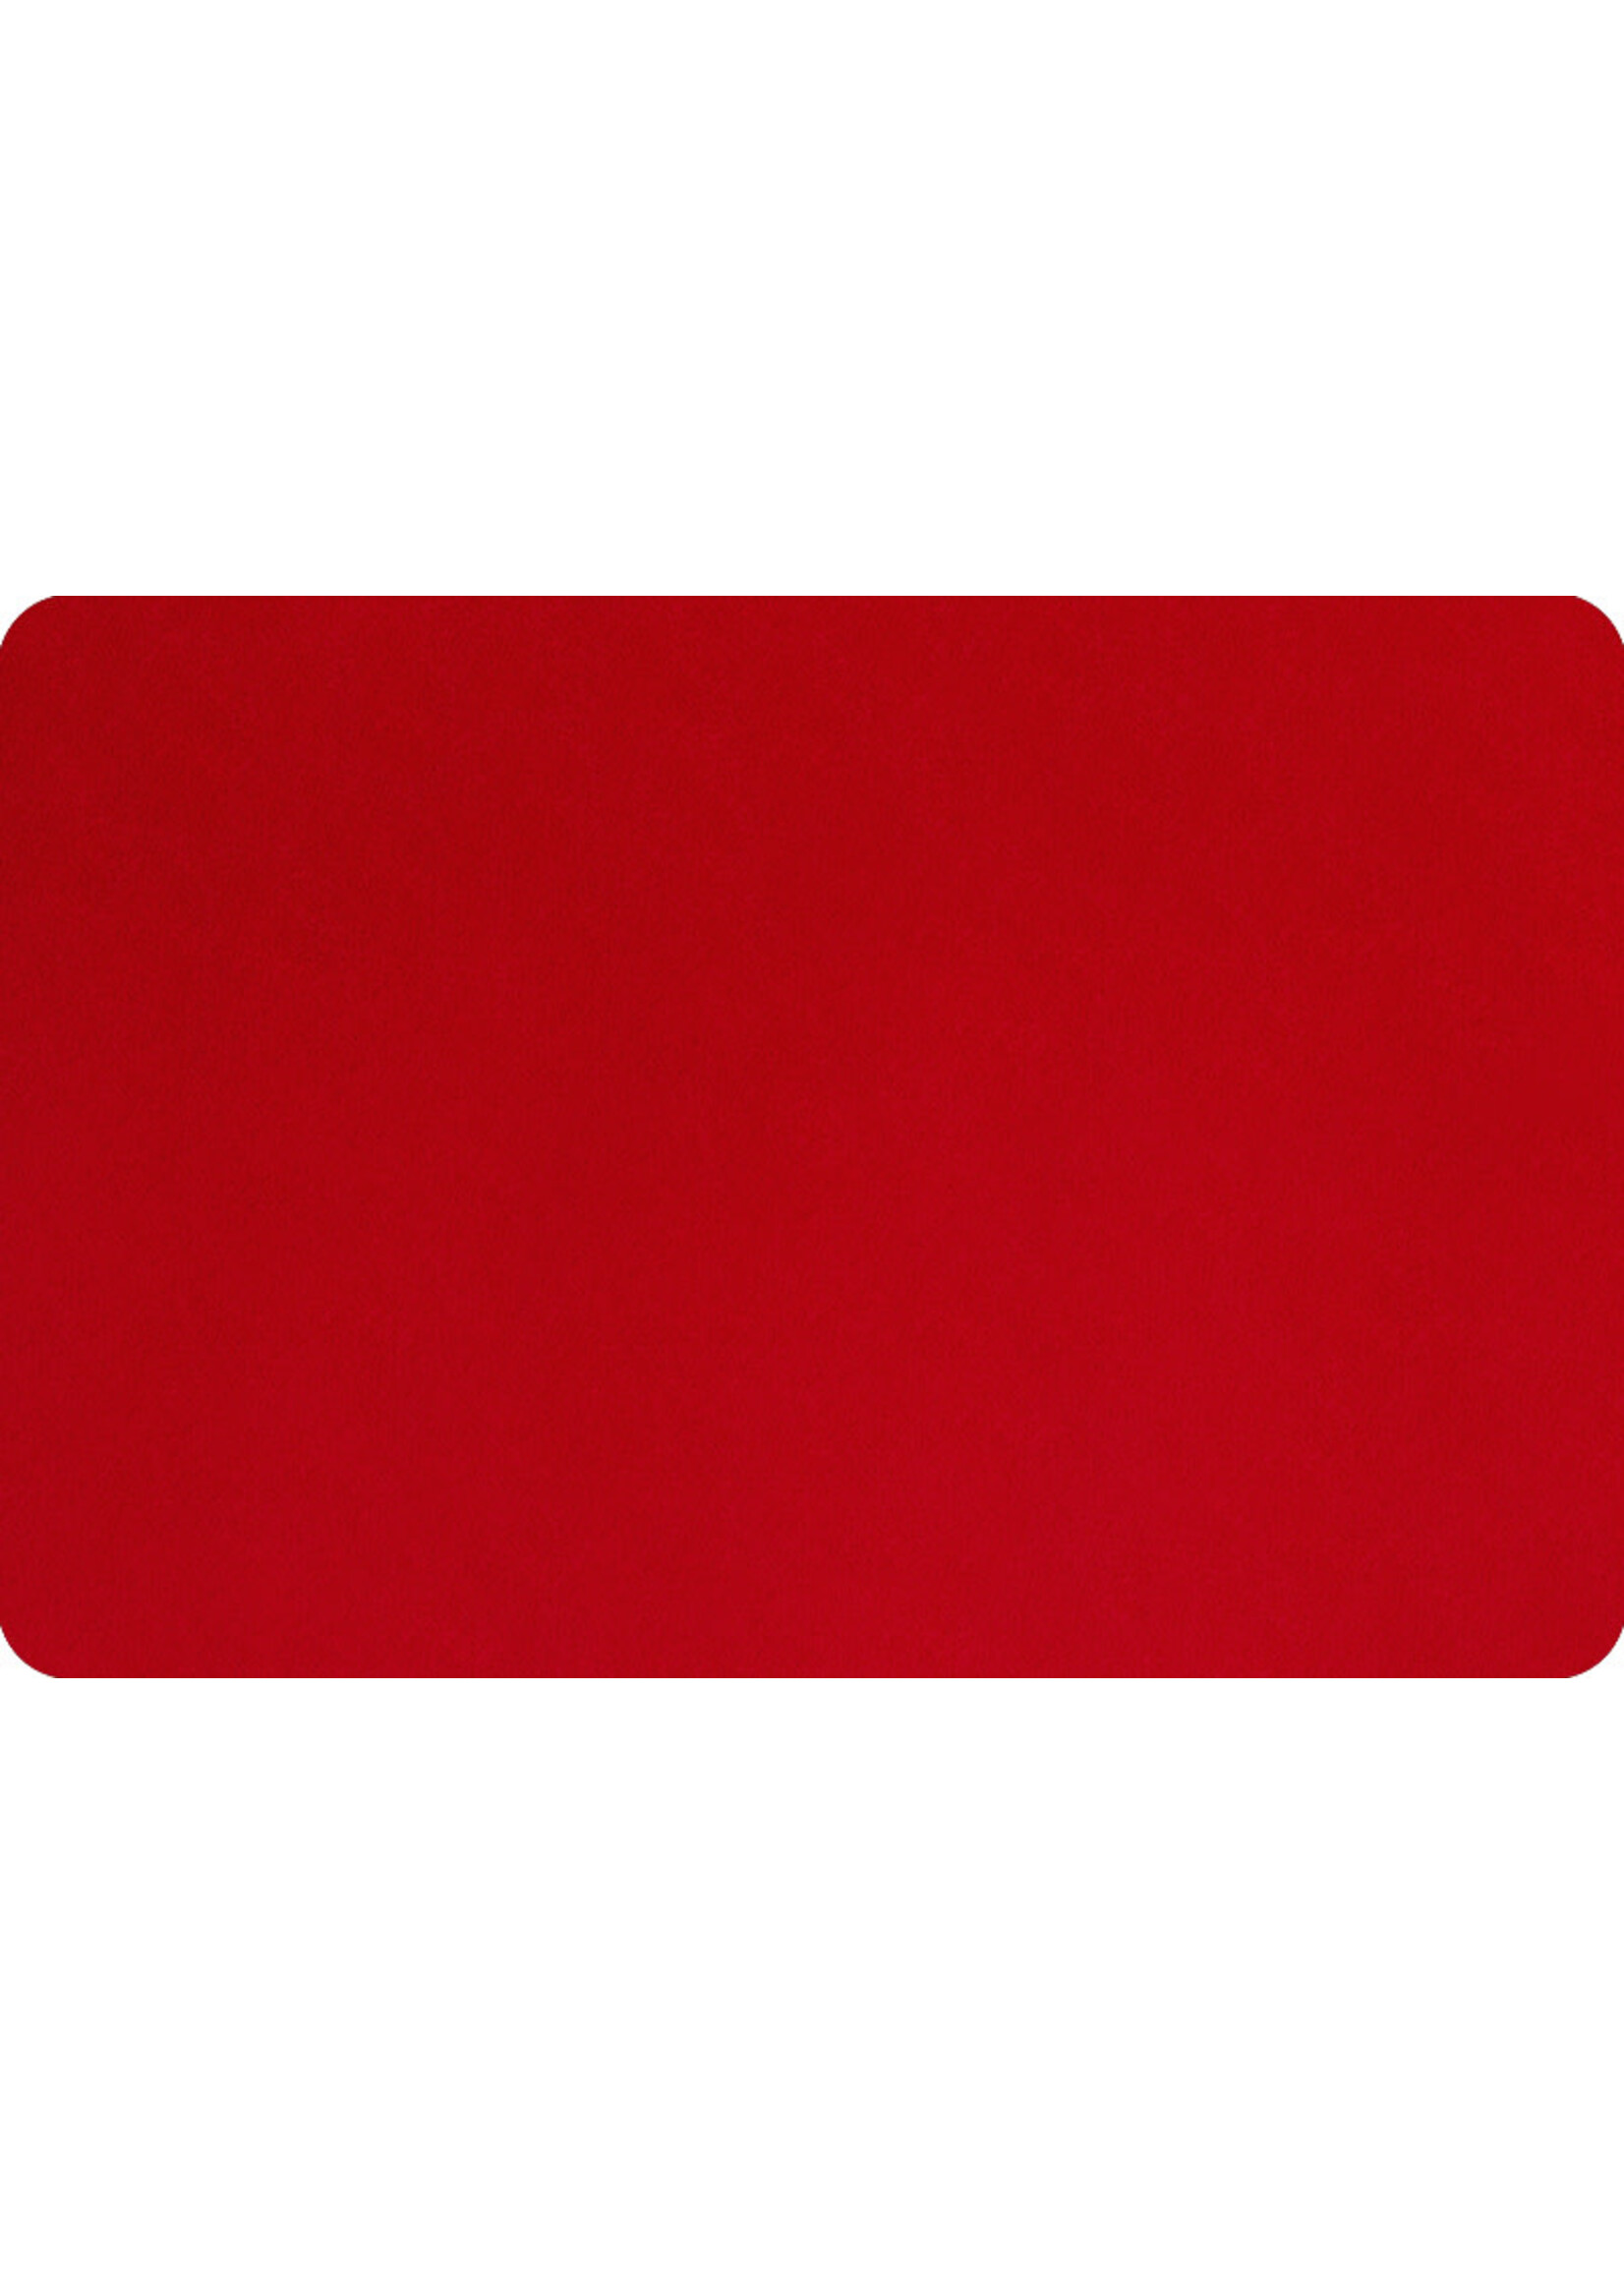 Shannon Fabrics Minky, Extra Wide Solid Cuddle3, 90" Scarlet, (by the inch)